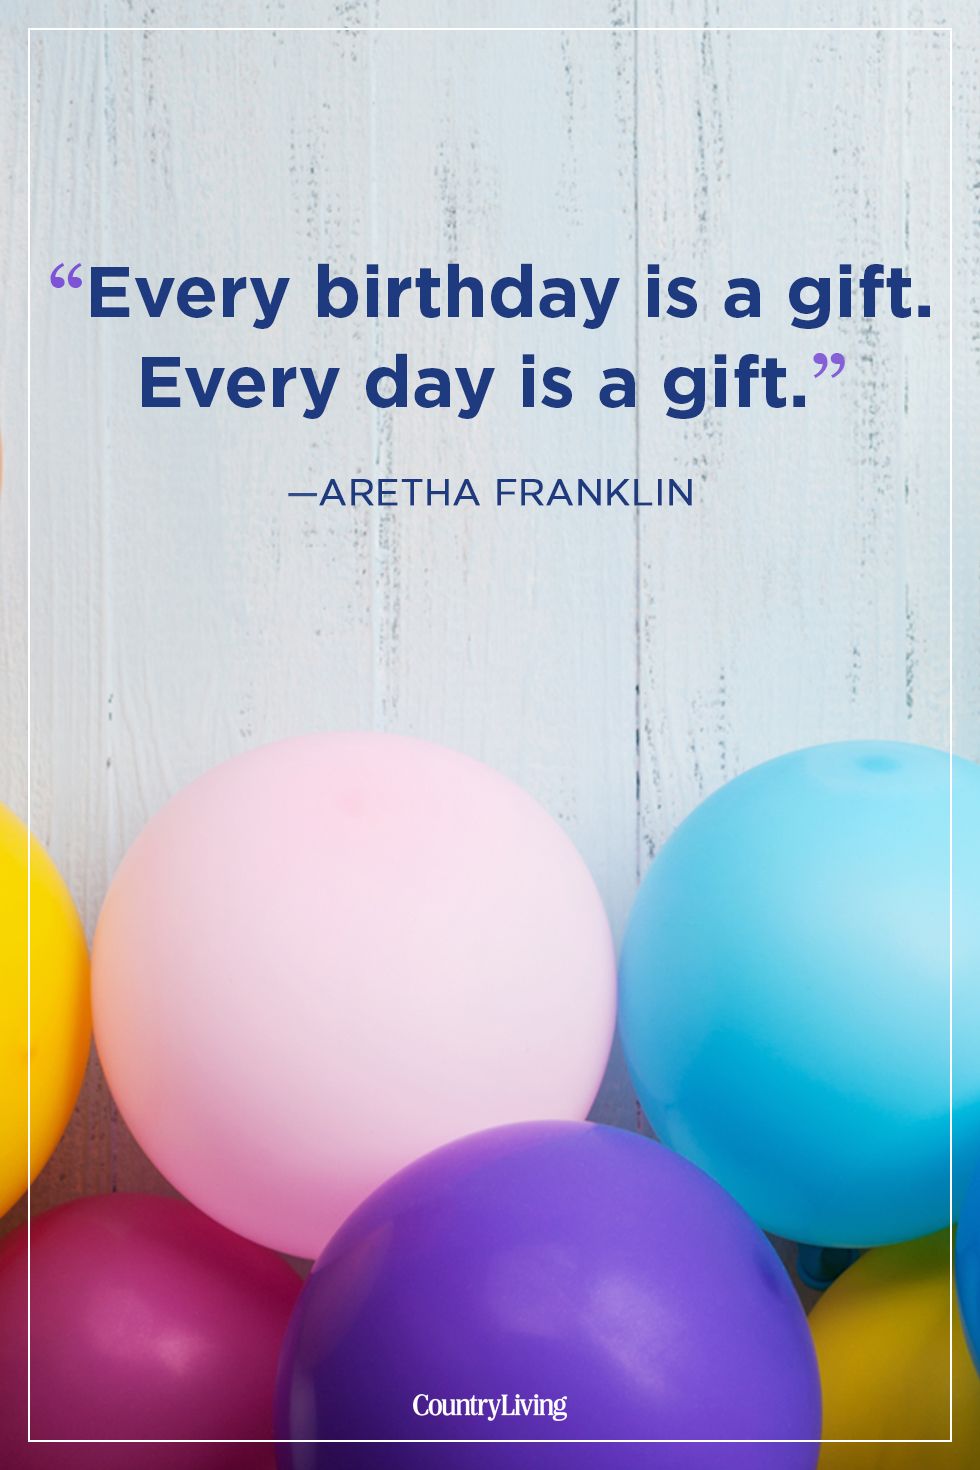 35 Best Birthday Quotes - Happy Birthday Wishes, Quotes, and Messages